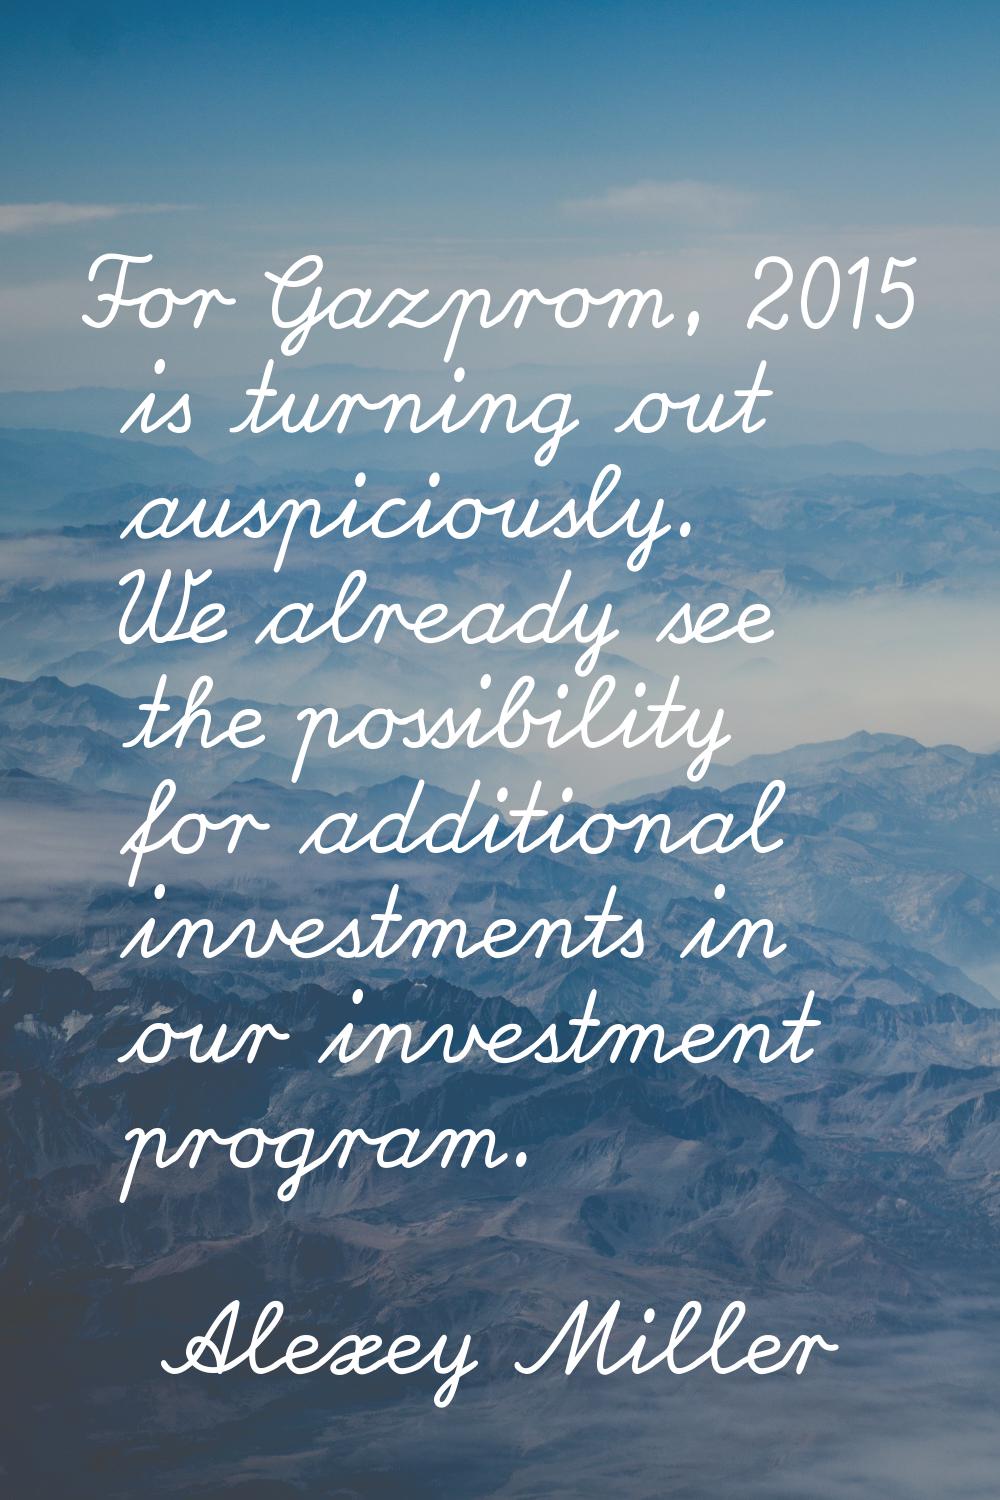 For Gazprom, 2015 is turning out auspiciously. We already see the possibility for additional invest